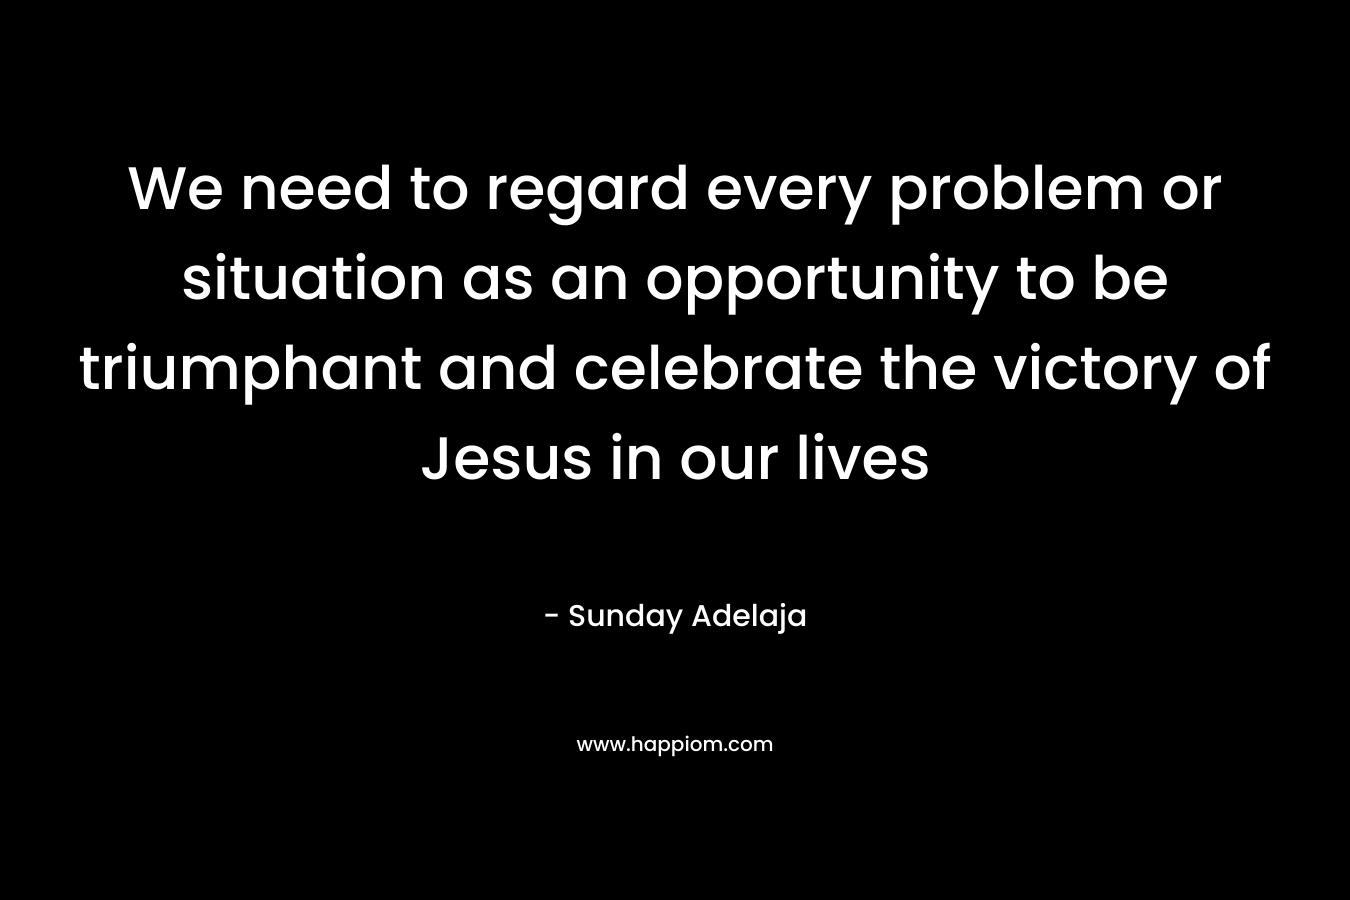 We need to regard every problem or situation as an opportunity to be triumphant and celebrate the victory of Jesus in our lives – Sunday Adelaja